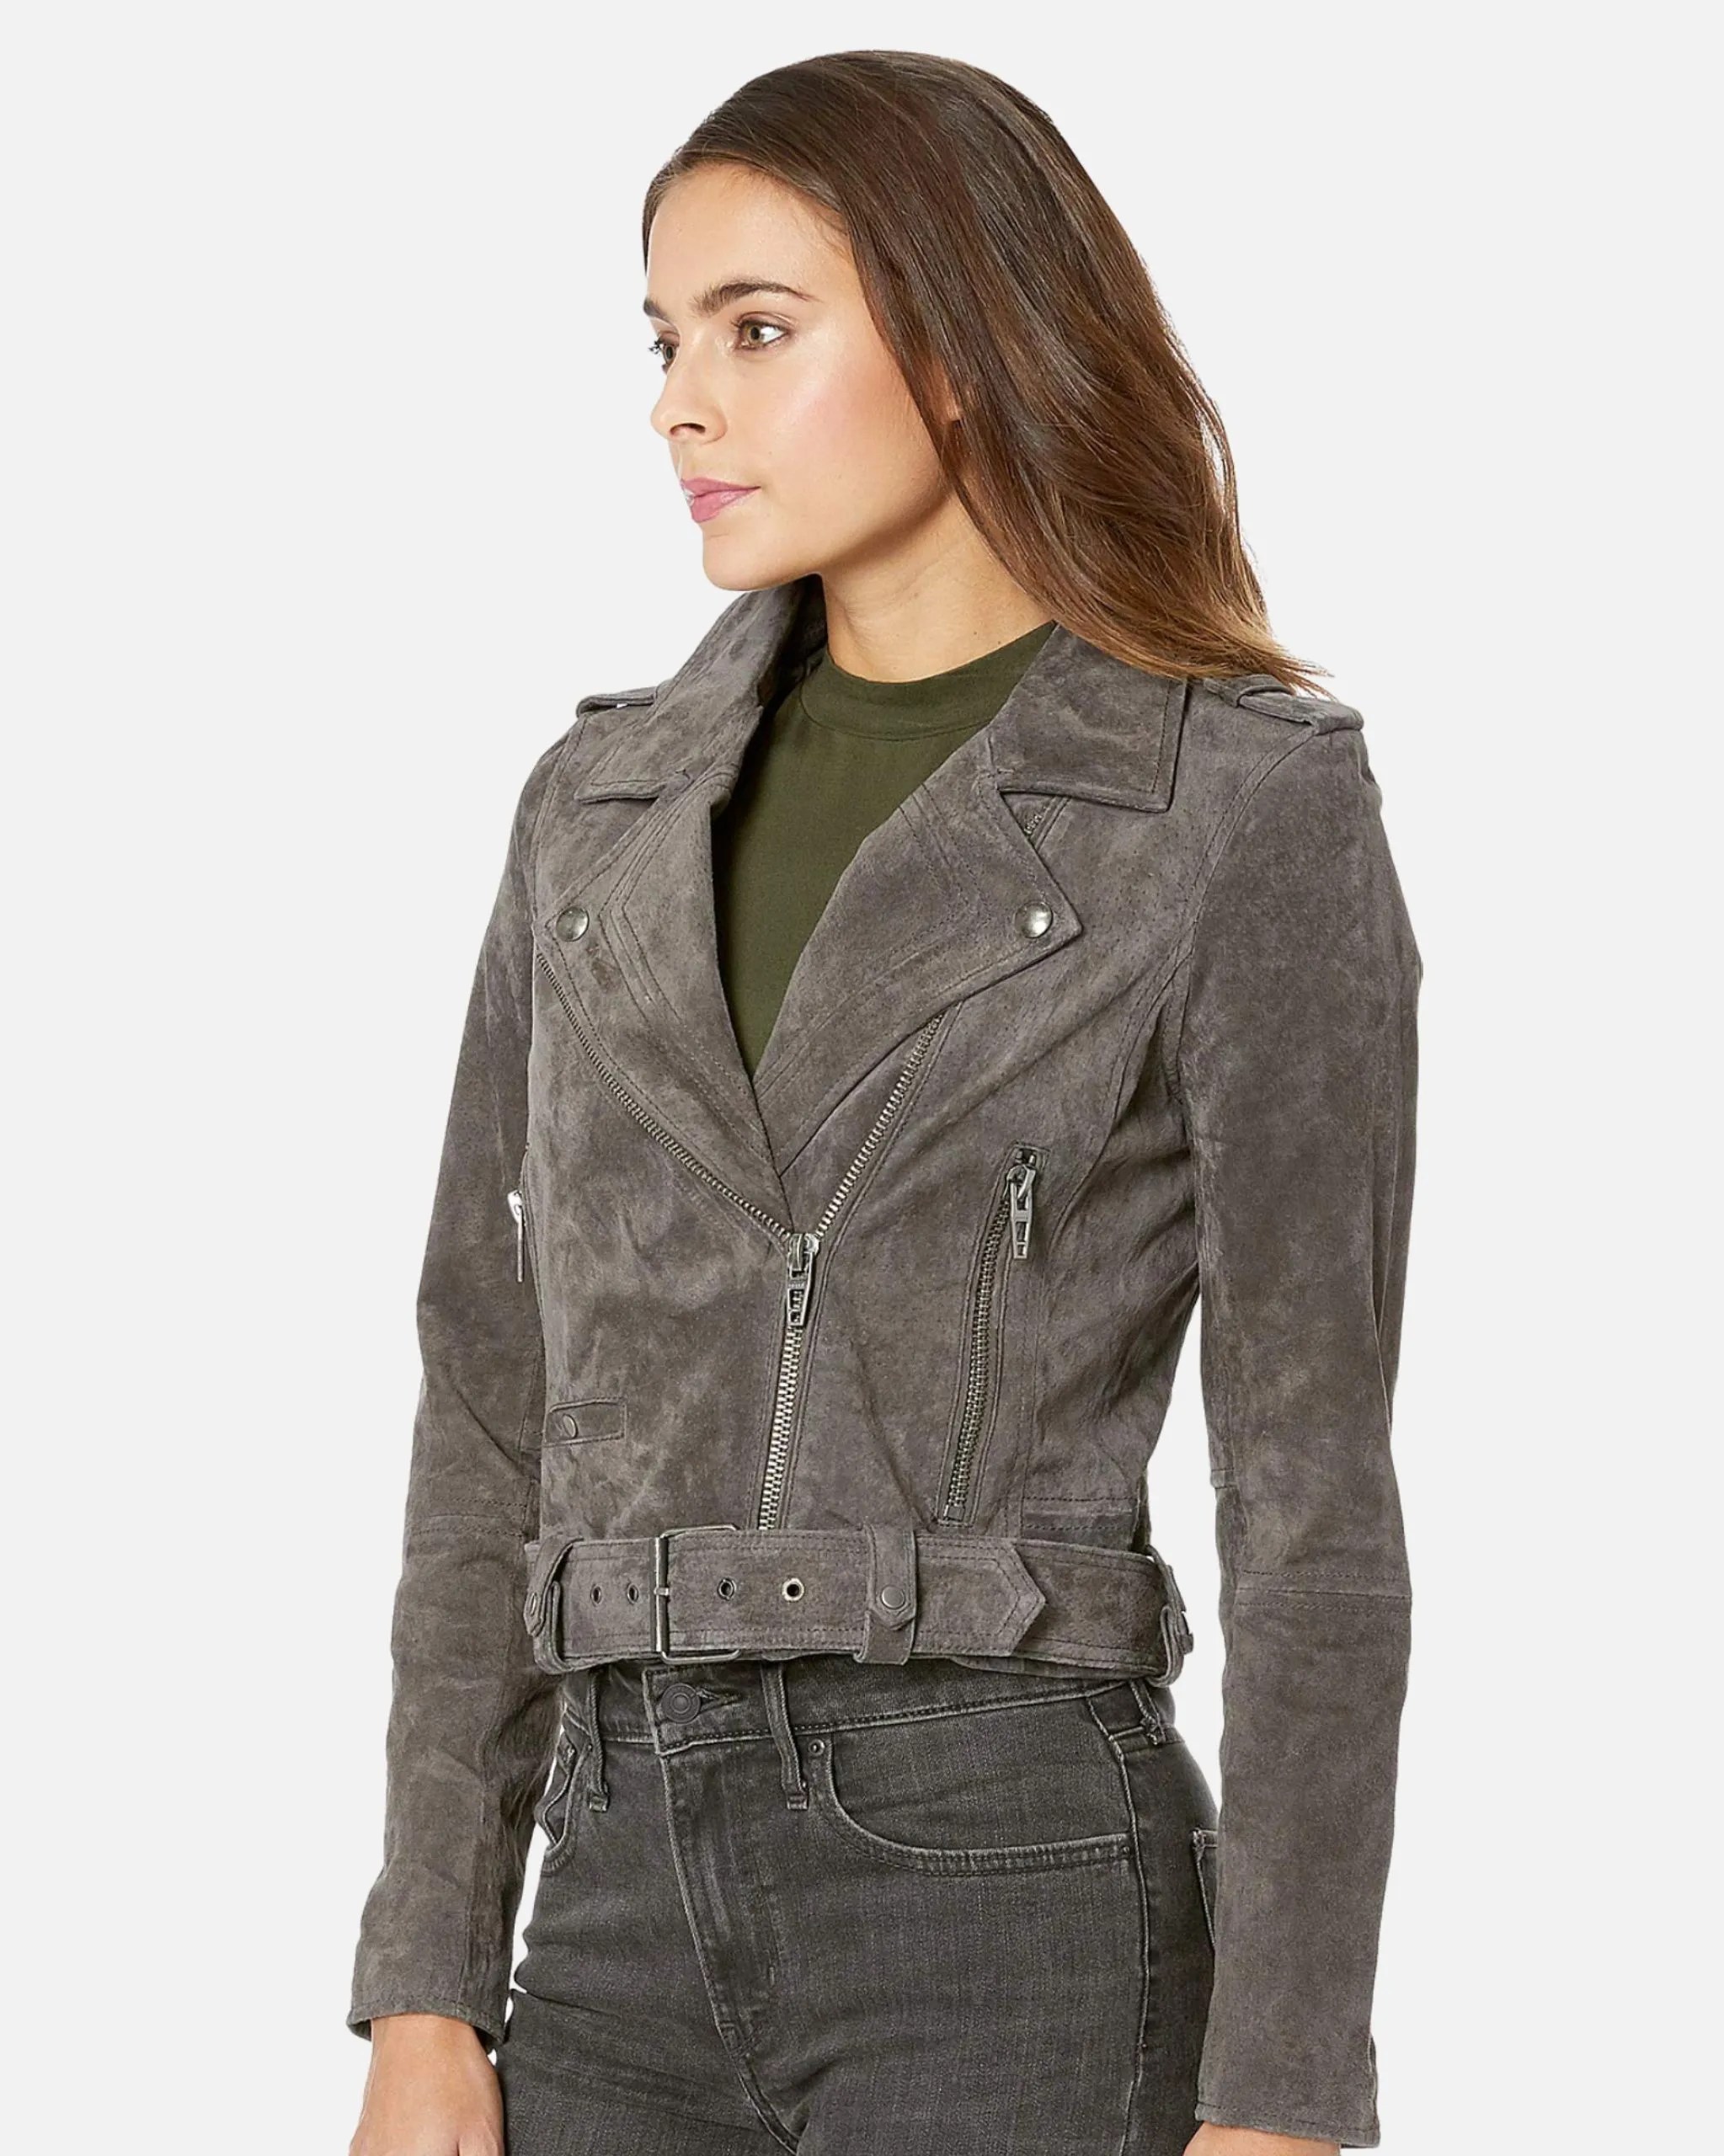 suede-french-grey-moto-leather-jacket-affordable-and-fashionable (3)